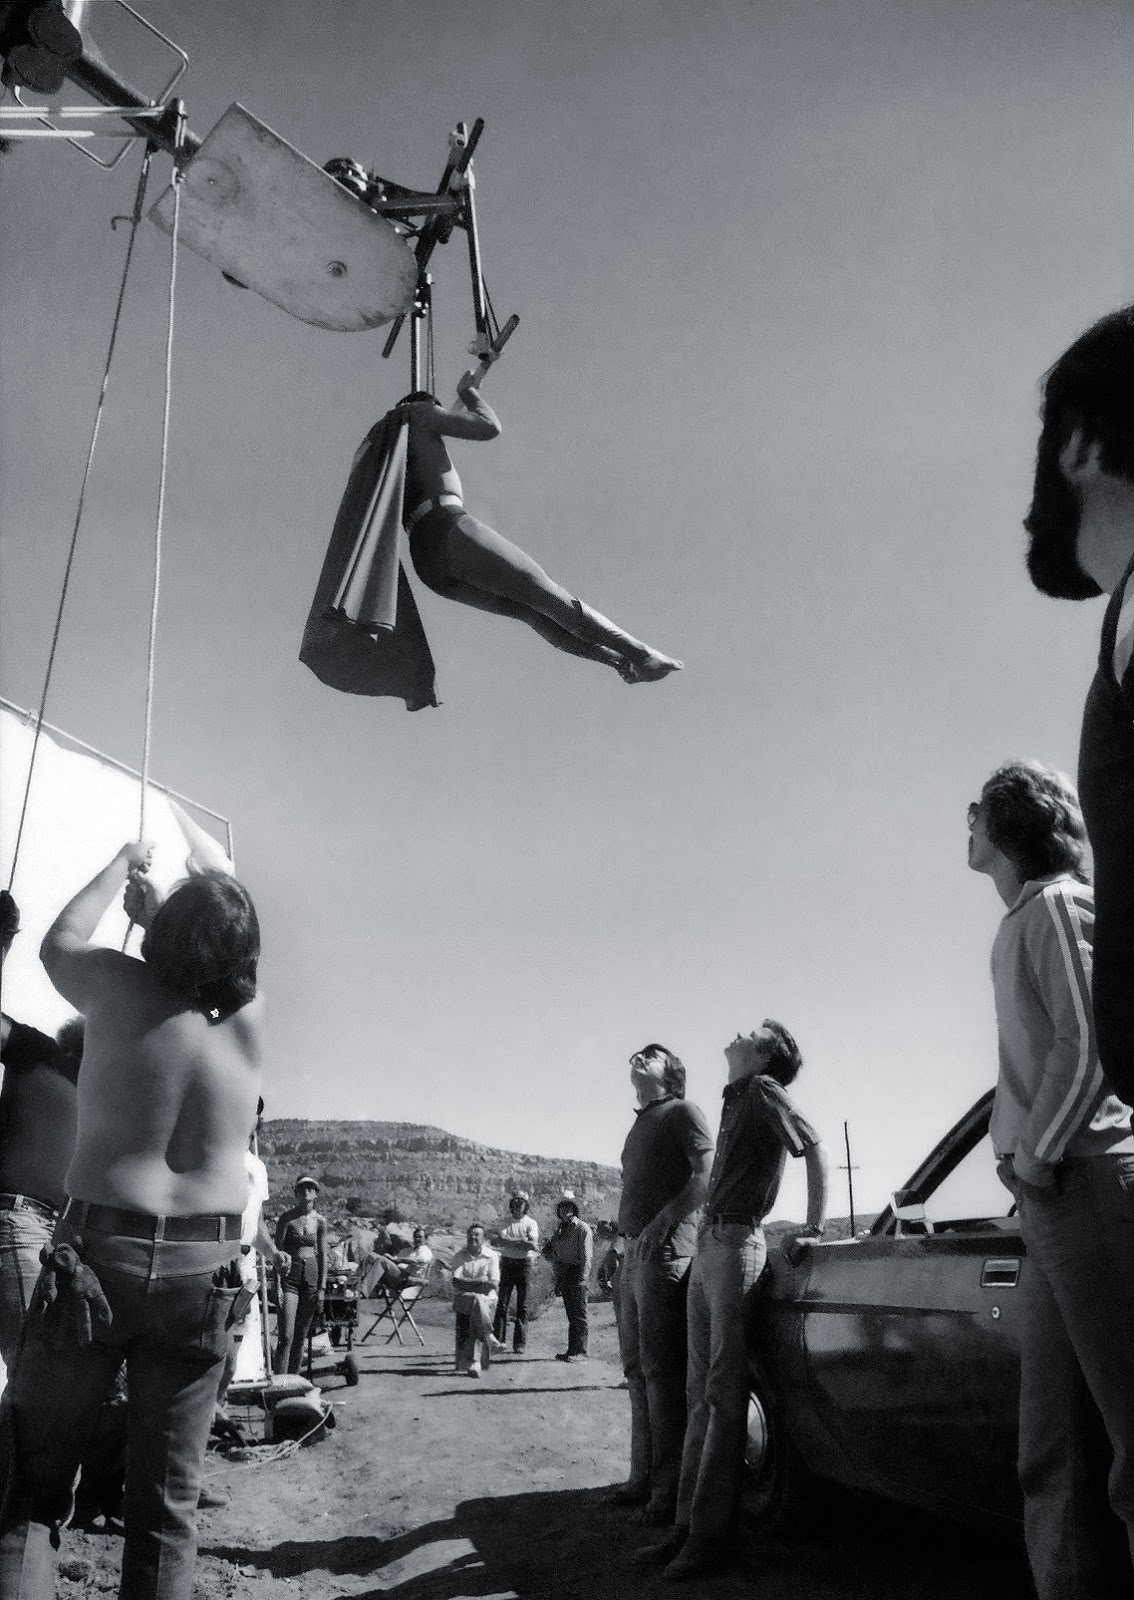 Christopher Reeves being hoisted up for a scene in Superman in 1978. He did most of his own stunts.